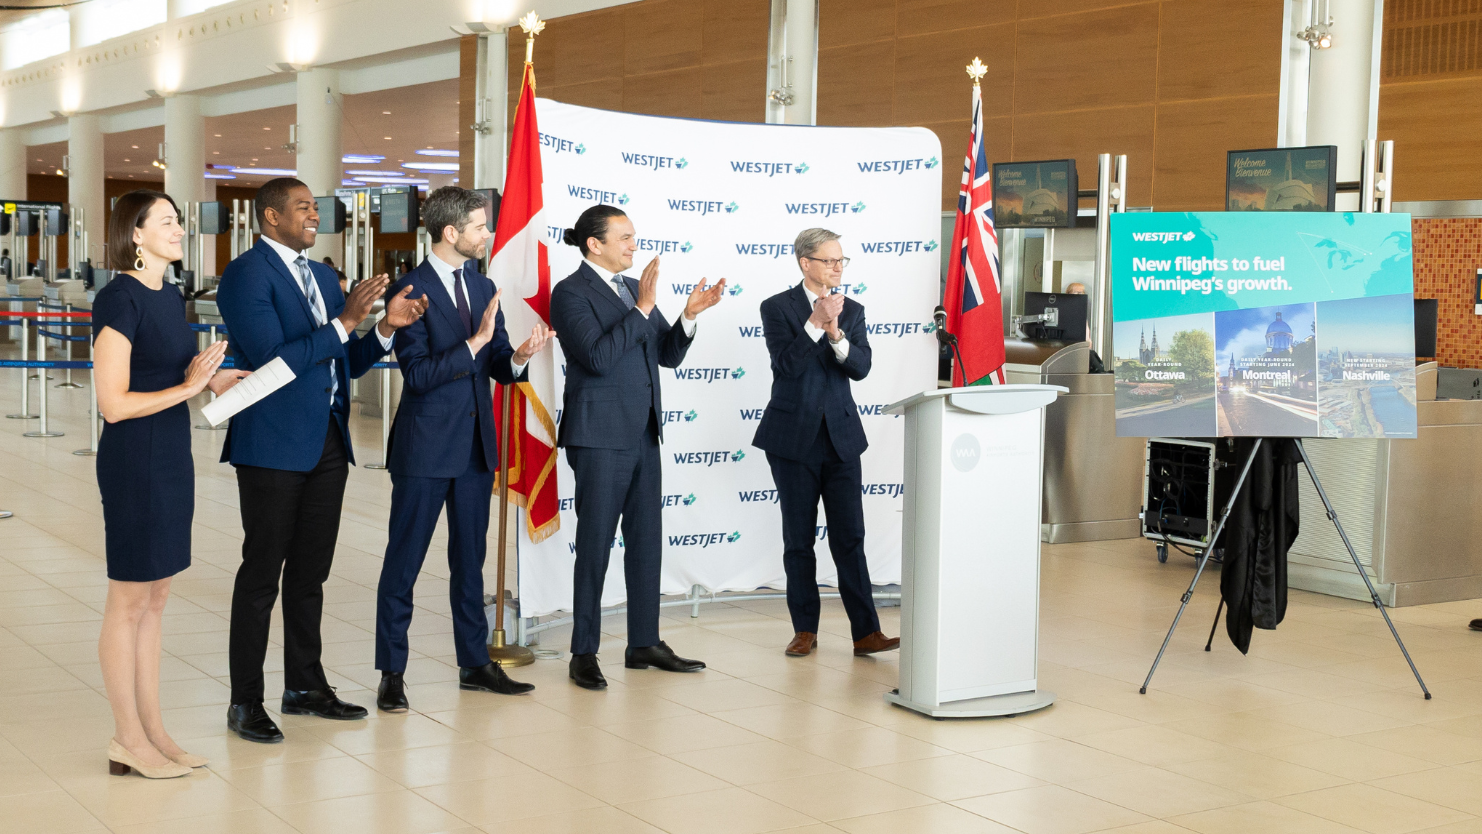 From left: Christina Iversen, WestJet, Director, External Affairs, Jamie Moses, Minister of Economic Development, Investment, Trade and Natural Resources of Manitoba, Nick Hays, President and CEO, Winnipeg Airports Authority., the Honourable Wab Kinew, Premier of Manitoba and Mike Scott, WestJet Group Executive Vice-President and Chief Financial Officer.